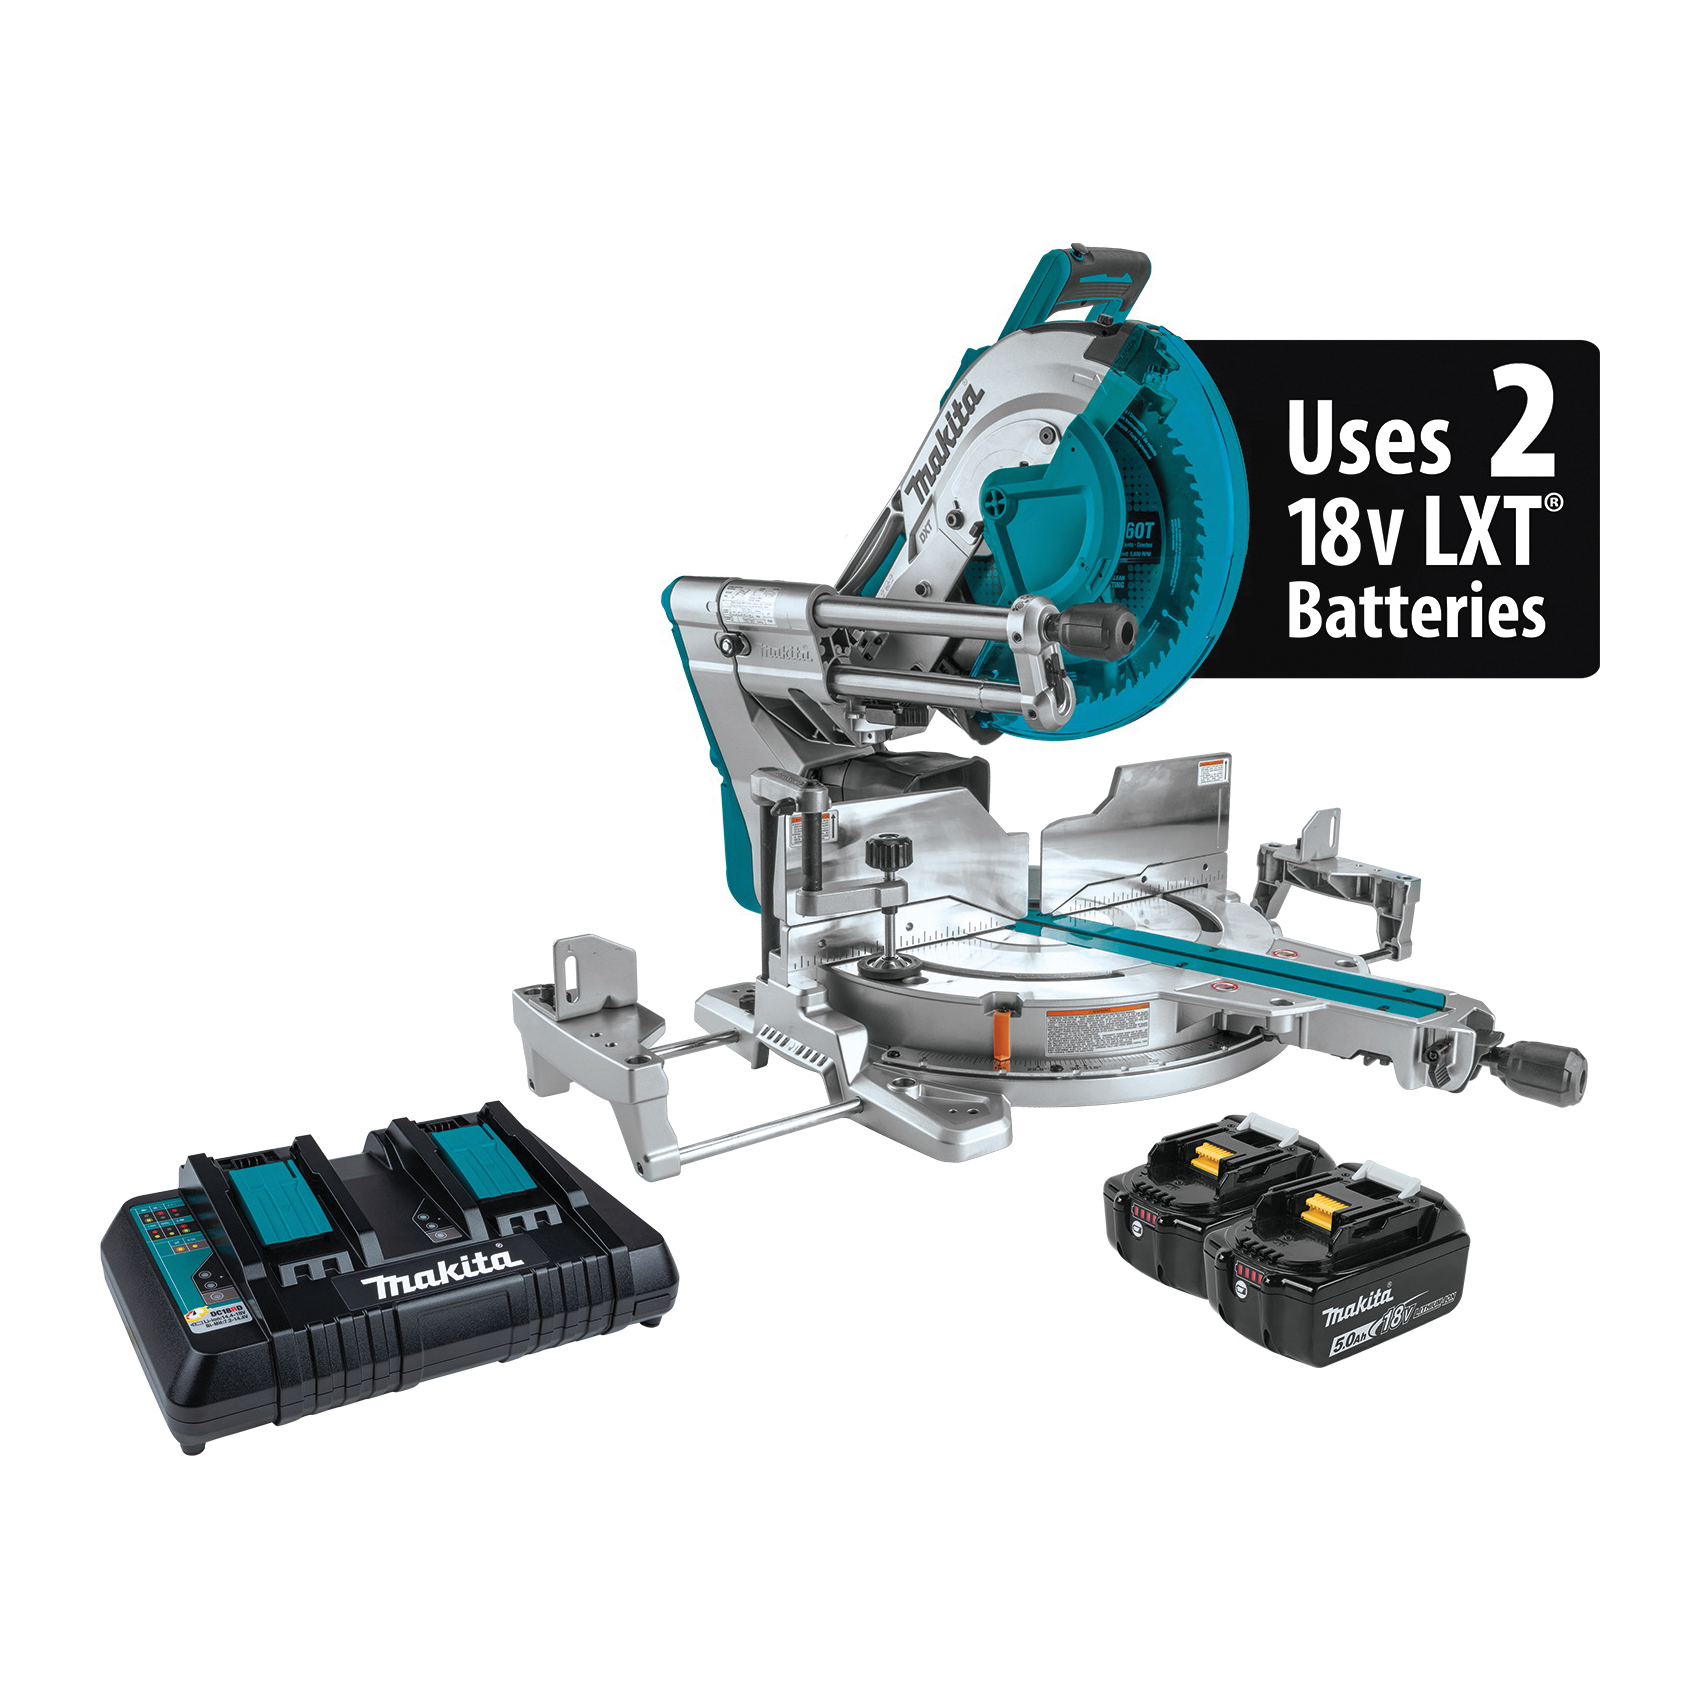 LXT XSL07PT Miter Saw with Laser Kit, Battery, 12 in Dia Blade, 4400 rpm Speed, 0 to 60 deg Max Miter Angle